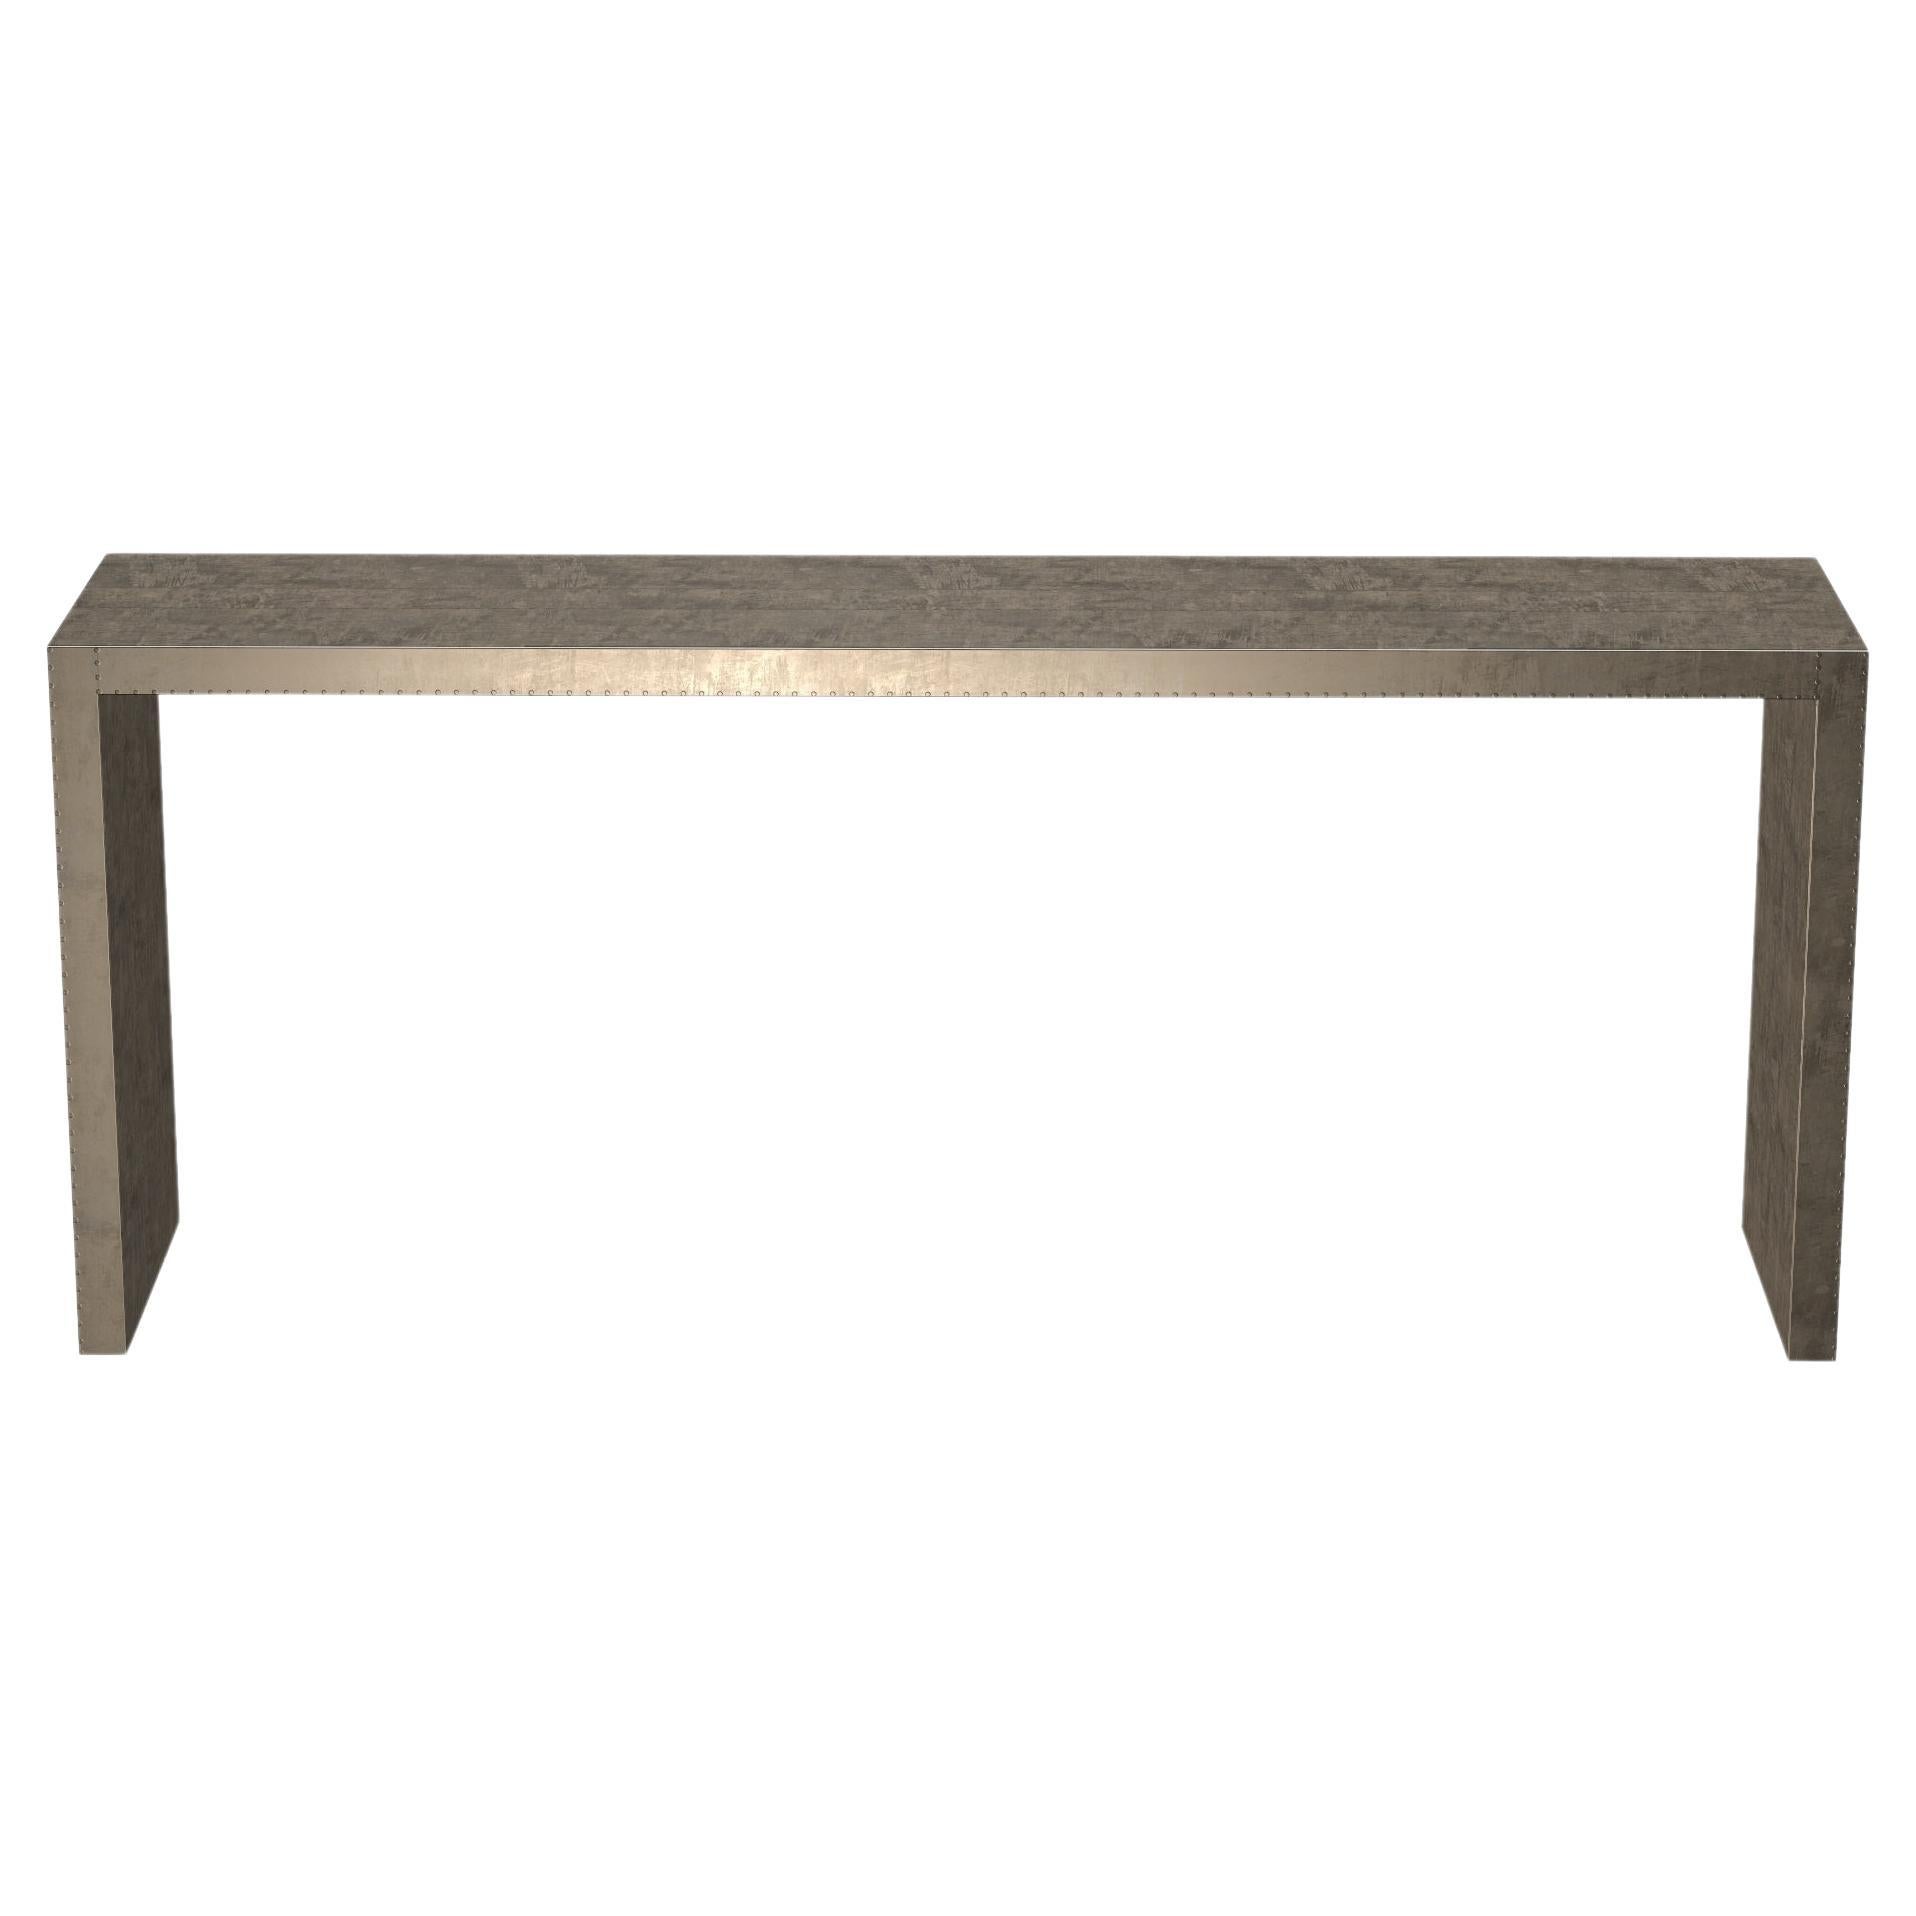 Art Deco Desks and Writing Console Tables in Smooth  Antique Bronze  by Alison S